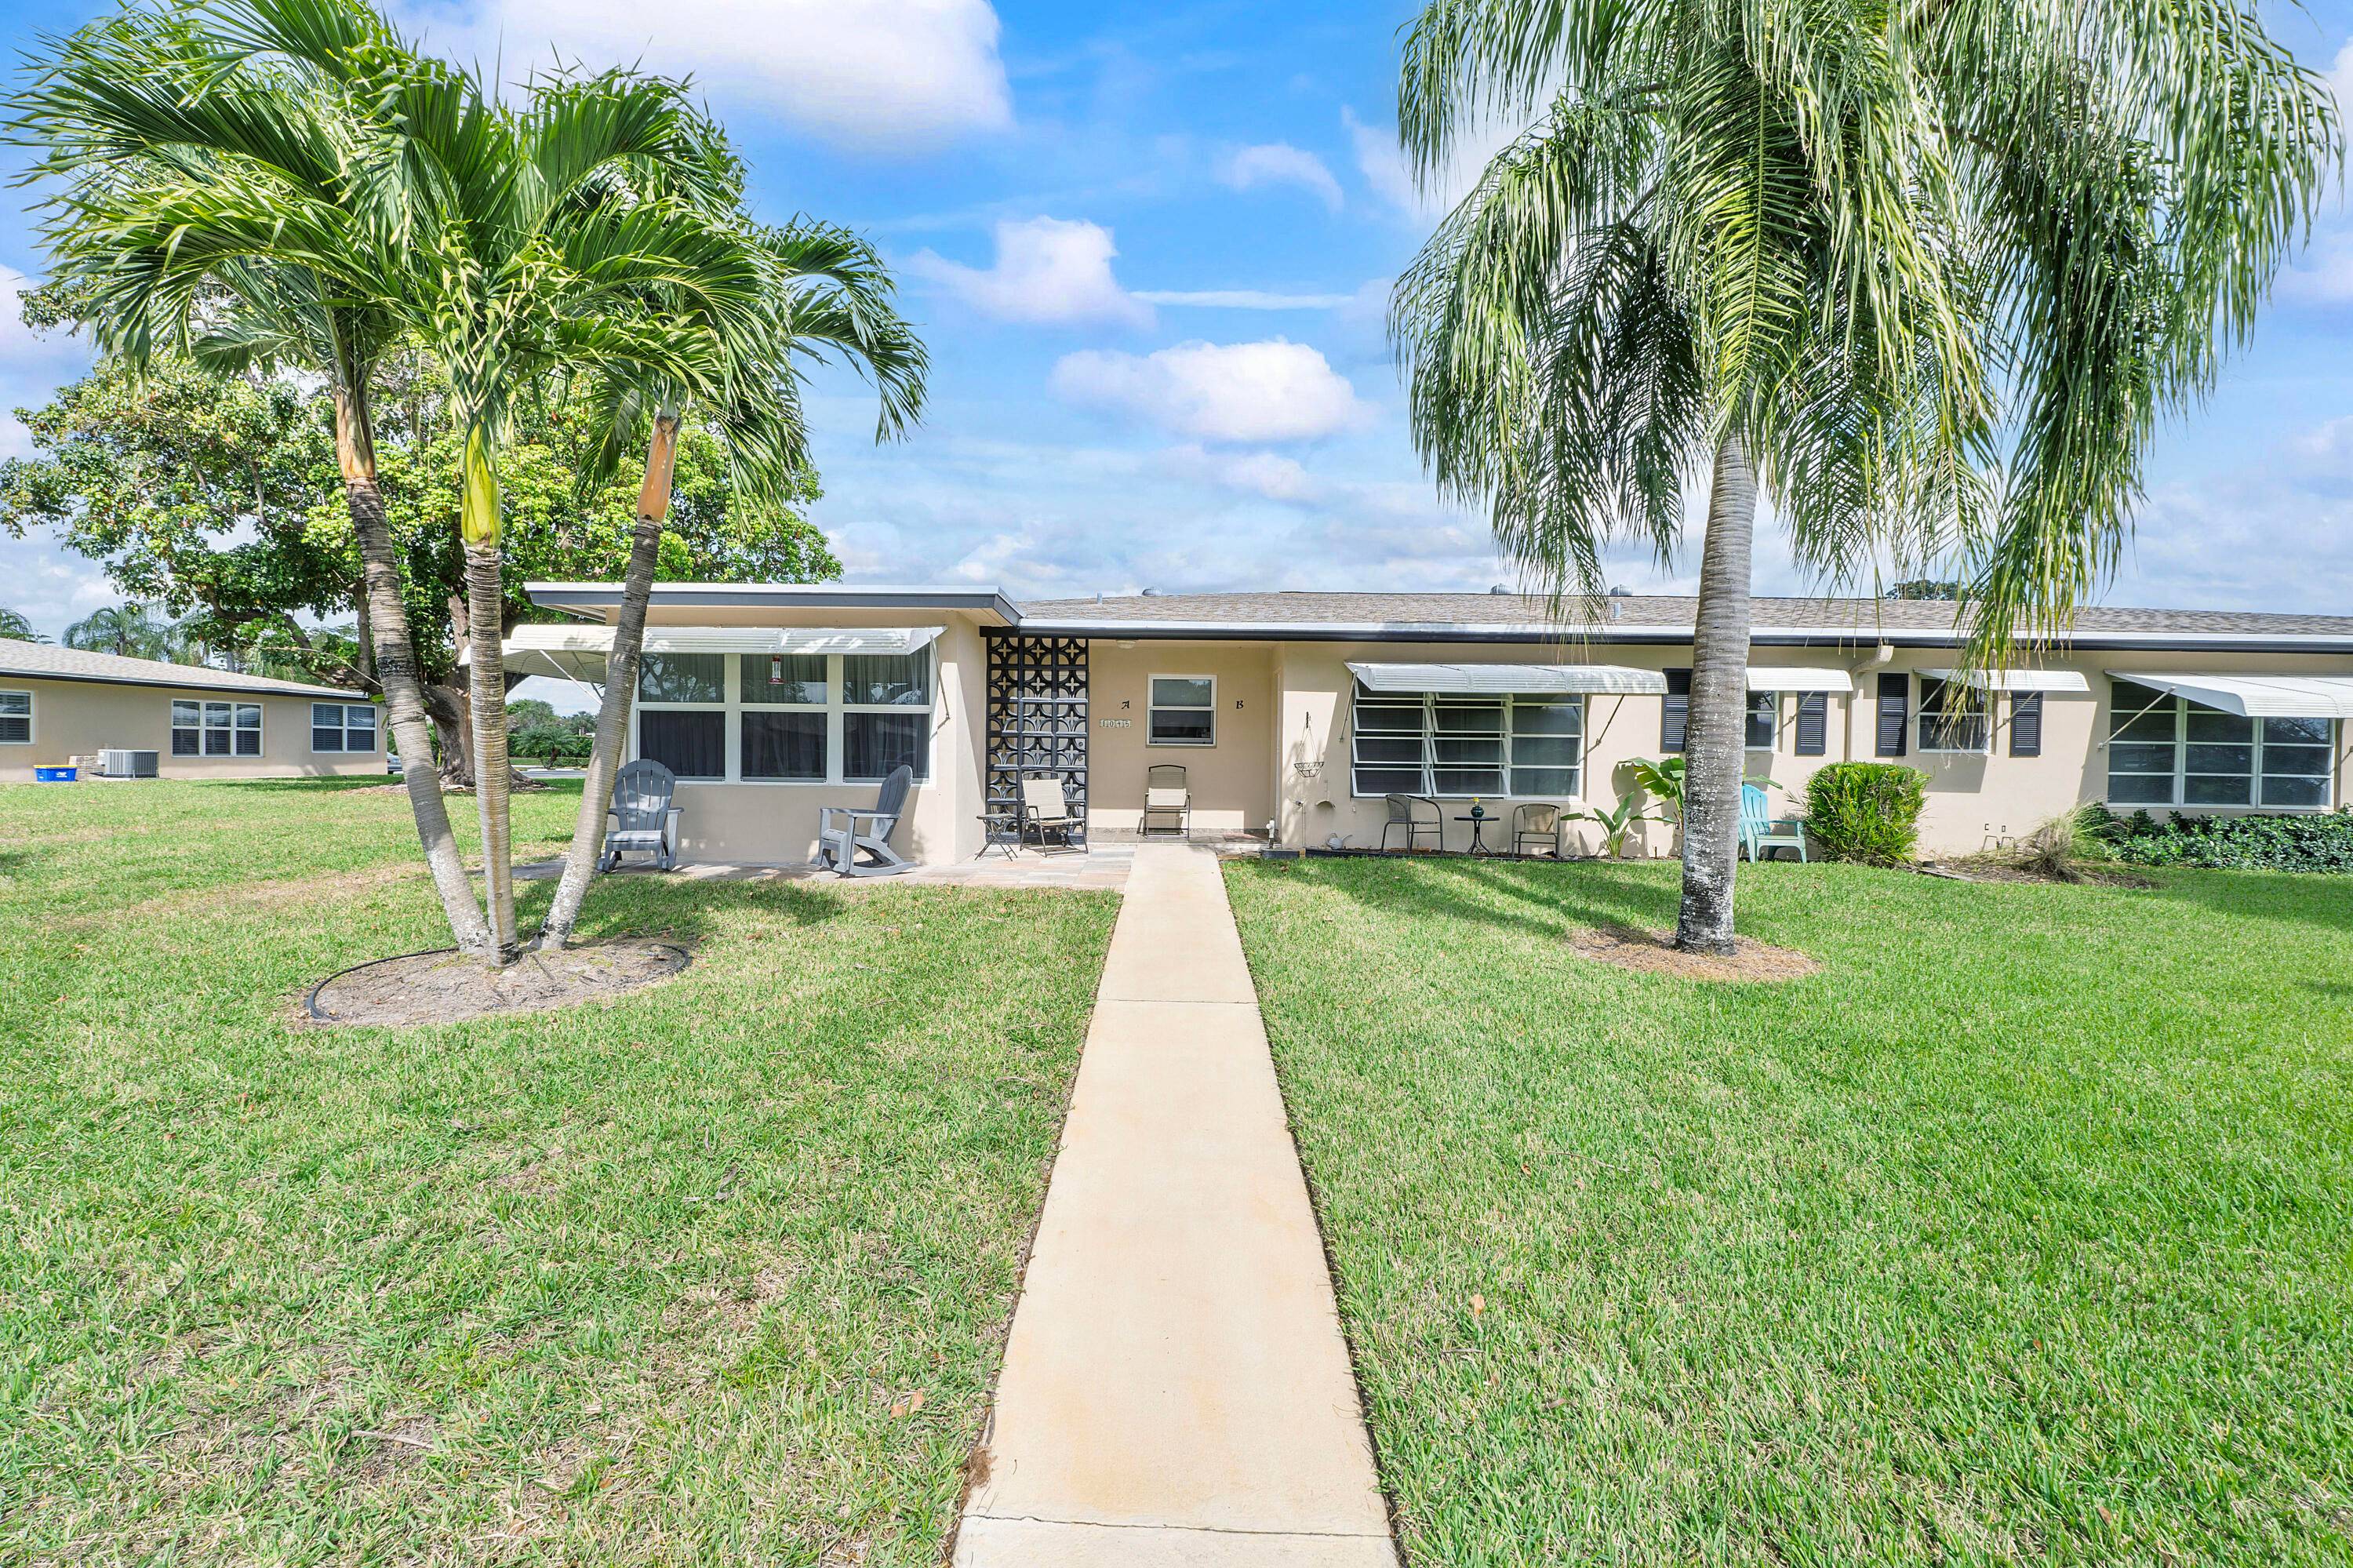 Welcome to High Point of Delray, an inviting 55 community conveniently situated near the lively Atlantic Avenue and bustling downtown Delray Beach.